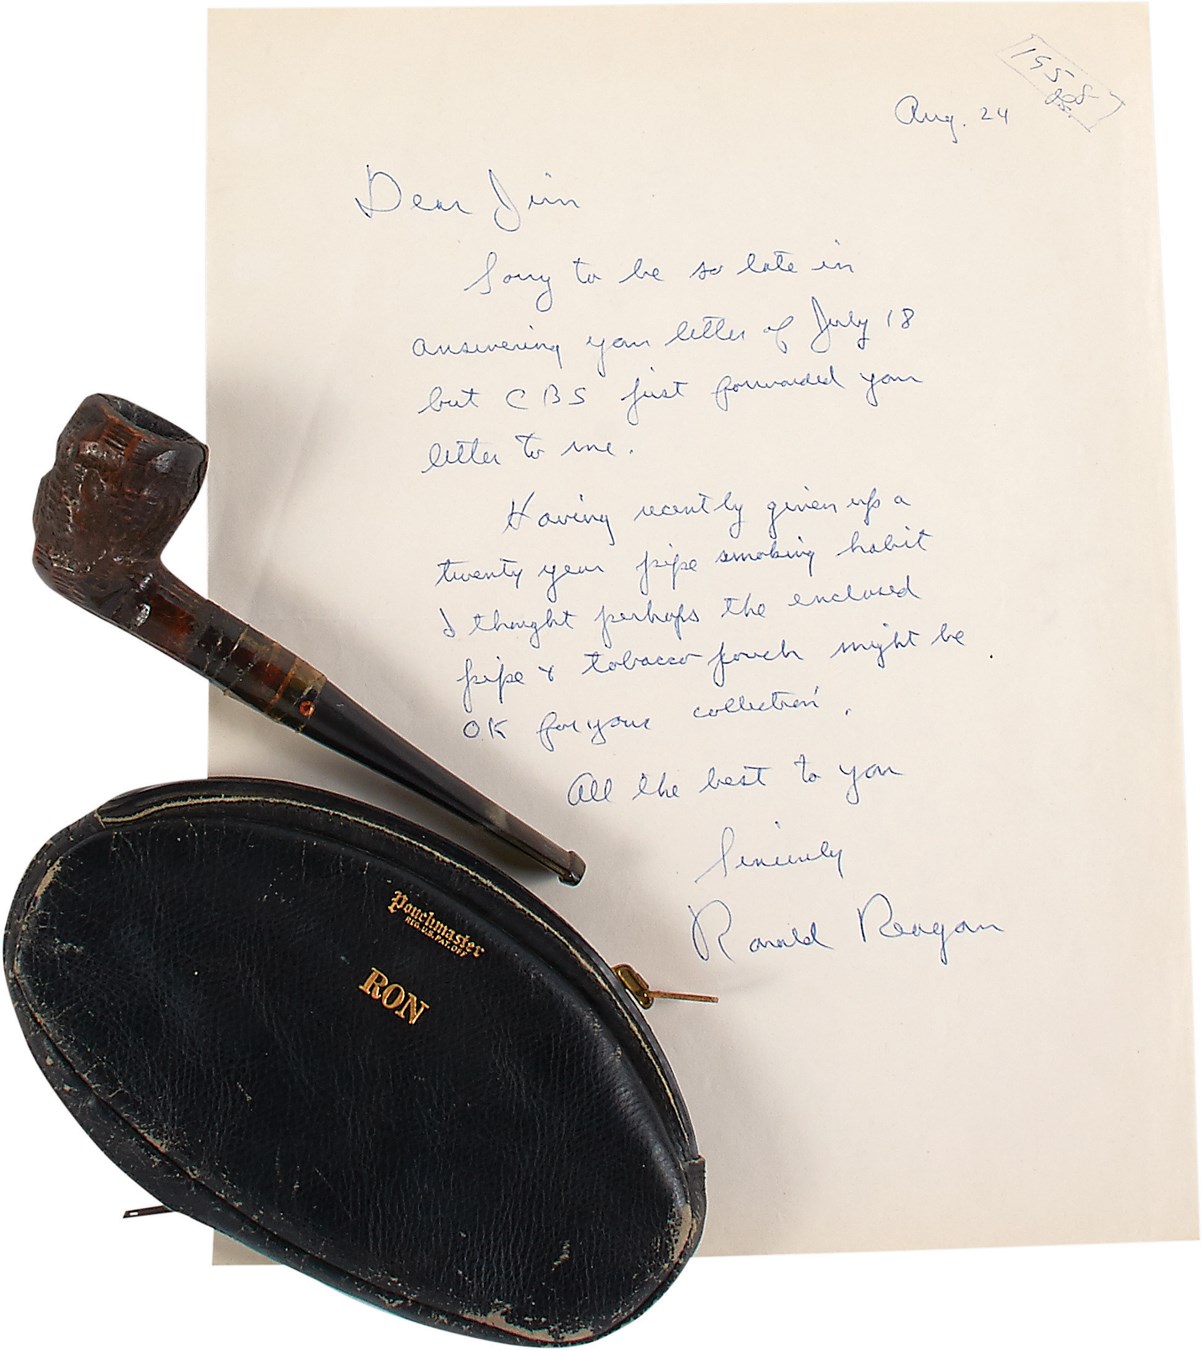 Jim Schendel Autograph Collection - Ronald Reagan Personally Used Pipe & Tobacco Pouch with Signed Letter - Gifted by Reagan (PSA)